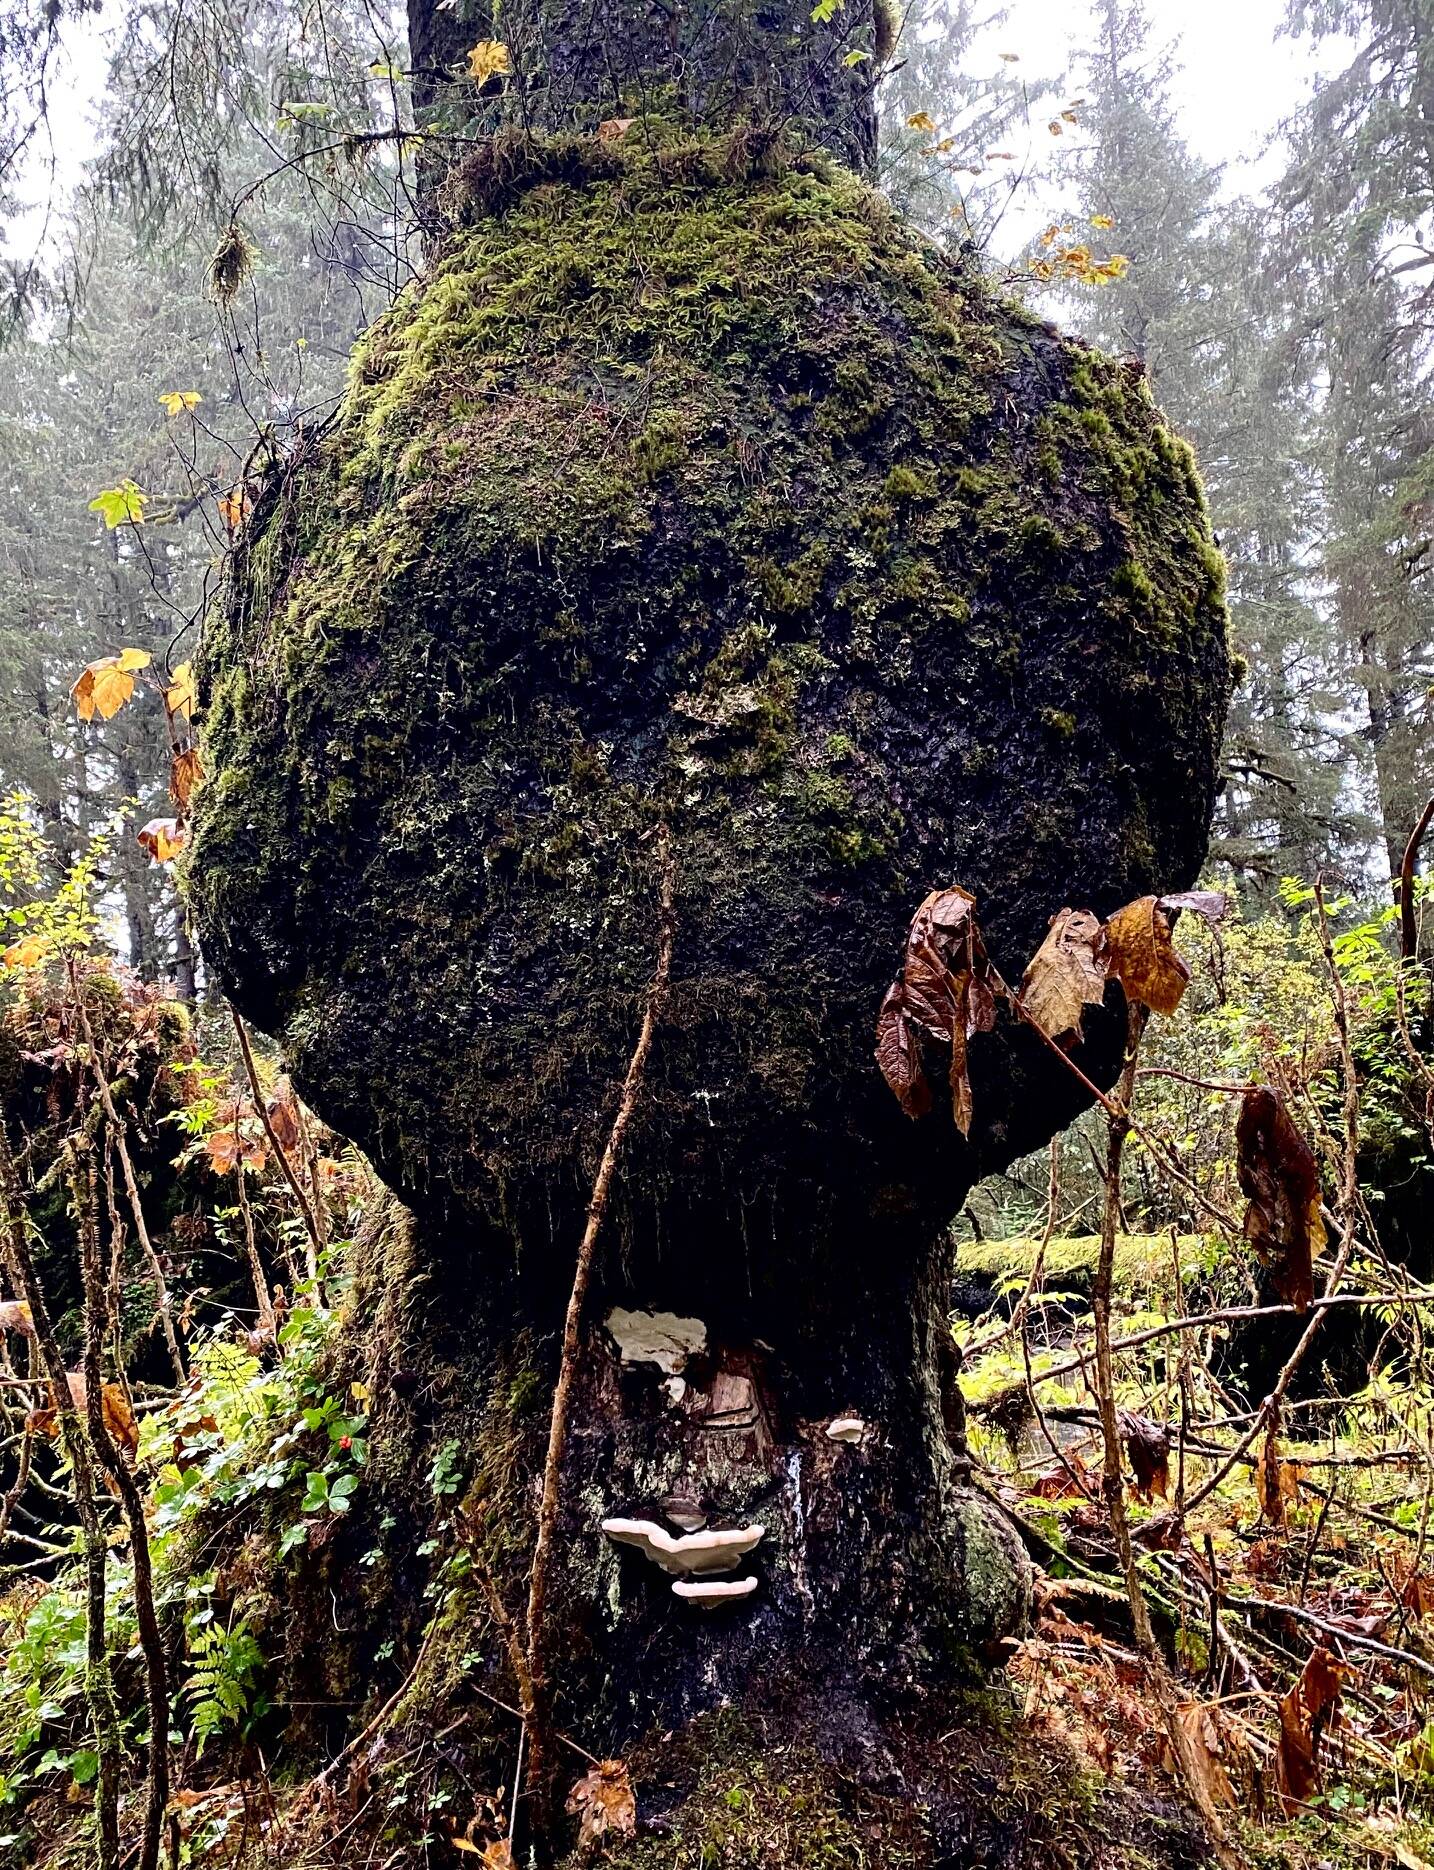 Bear bread looks insignificant under the huge burl of this evergreen tree on Auke Nu Trail on Sept. 30. (Photo by Denise Carroll)